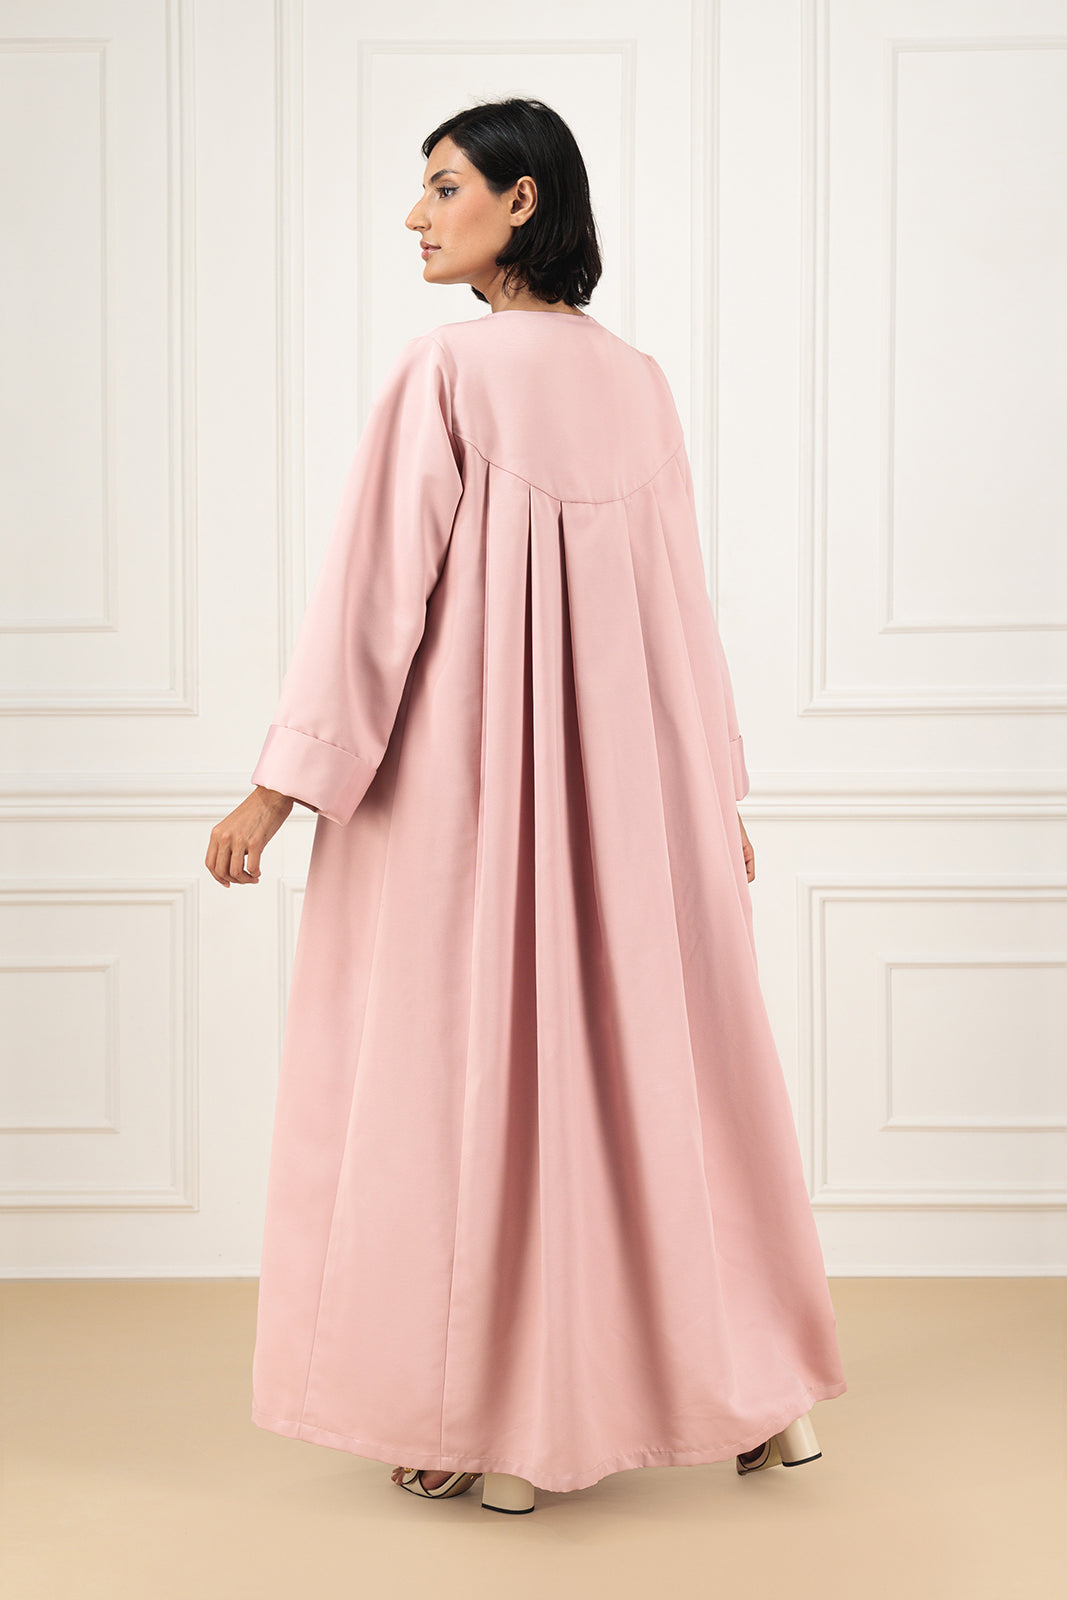 Classic textured set abaya with lapels and touches of beads work